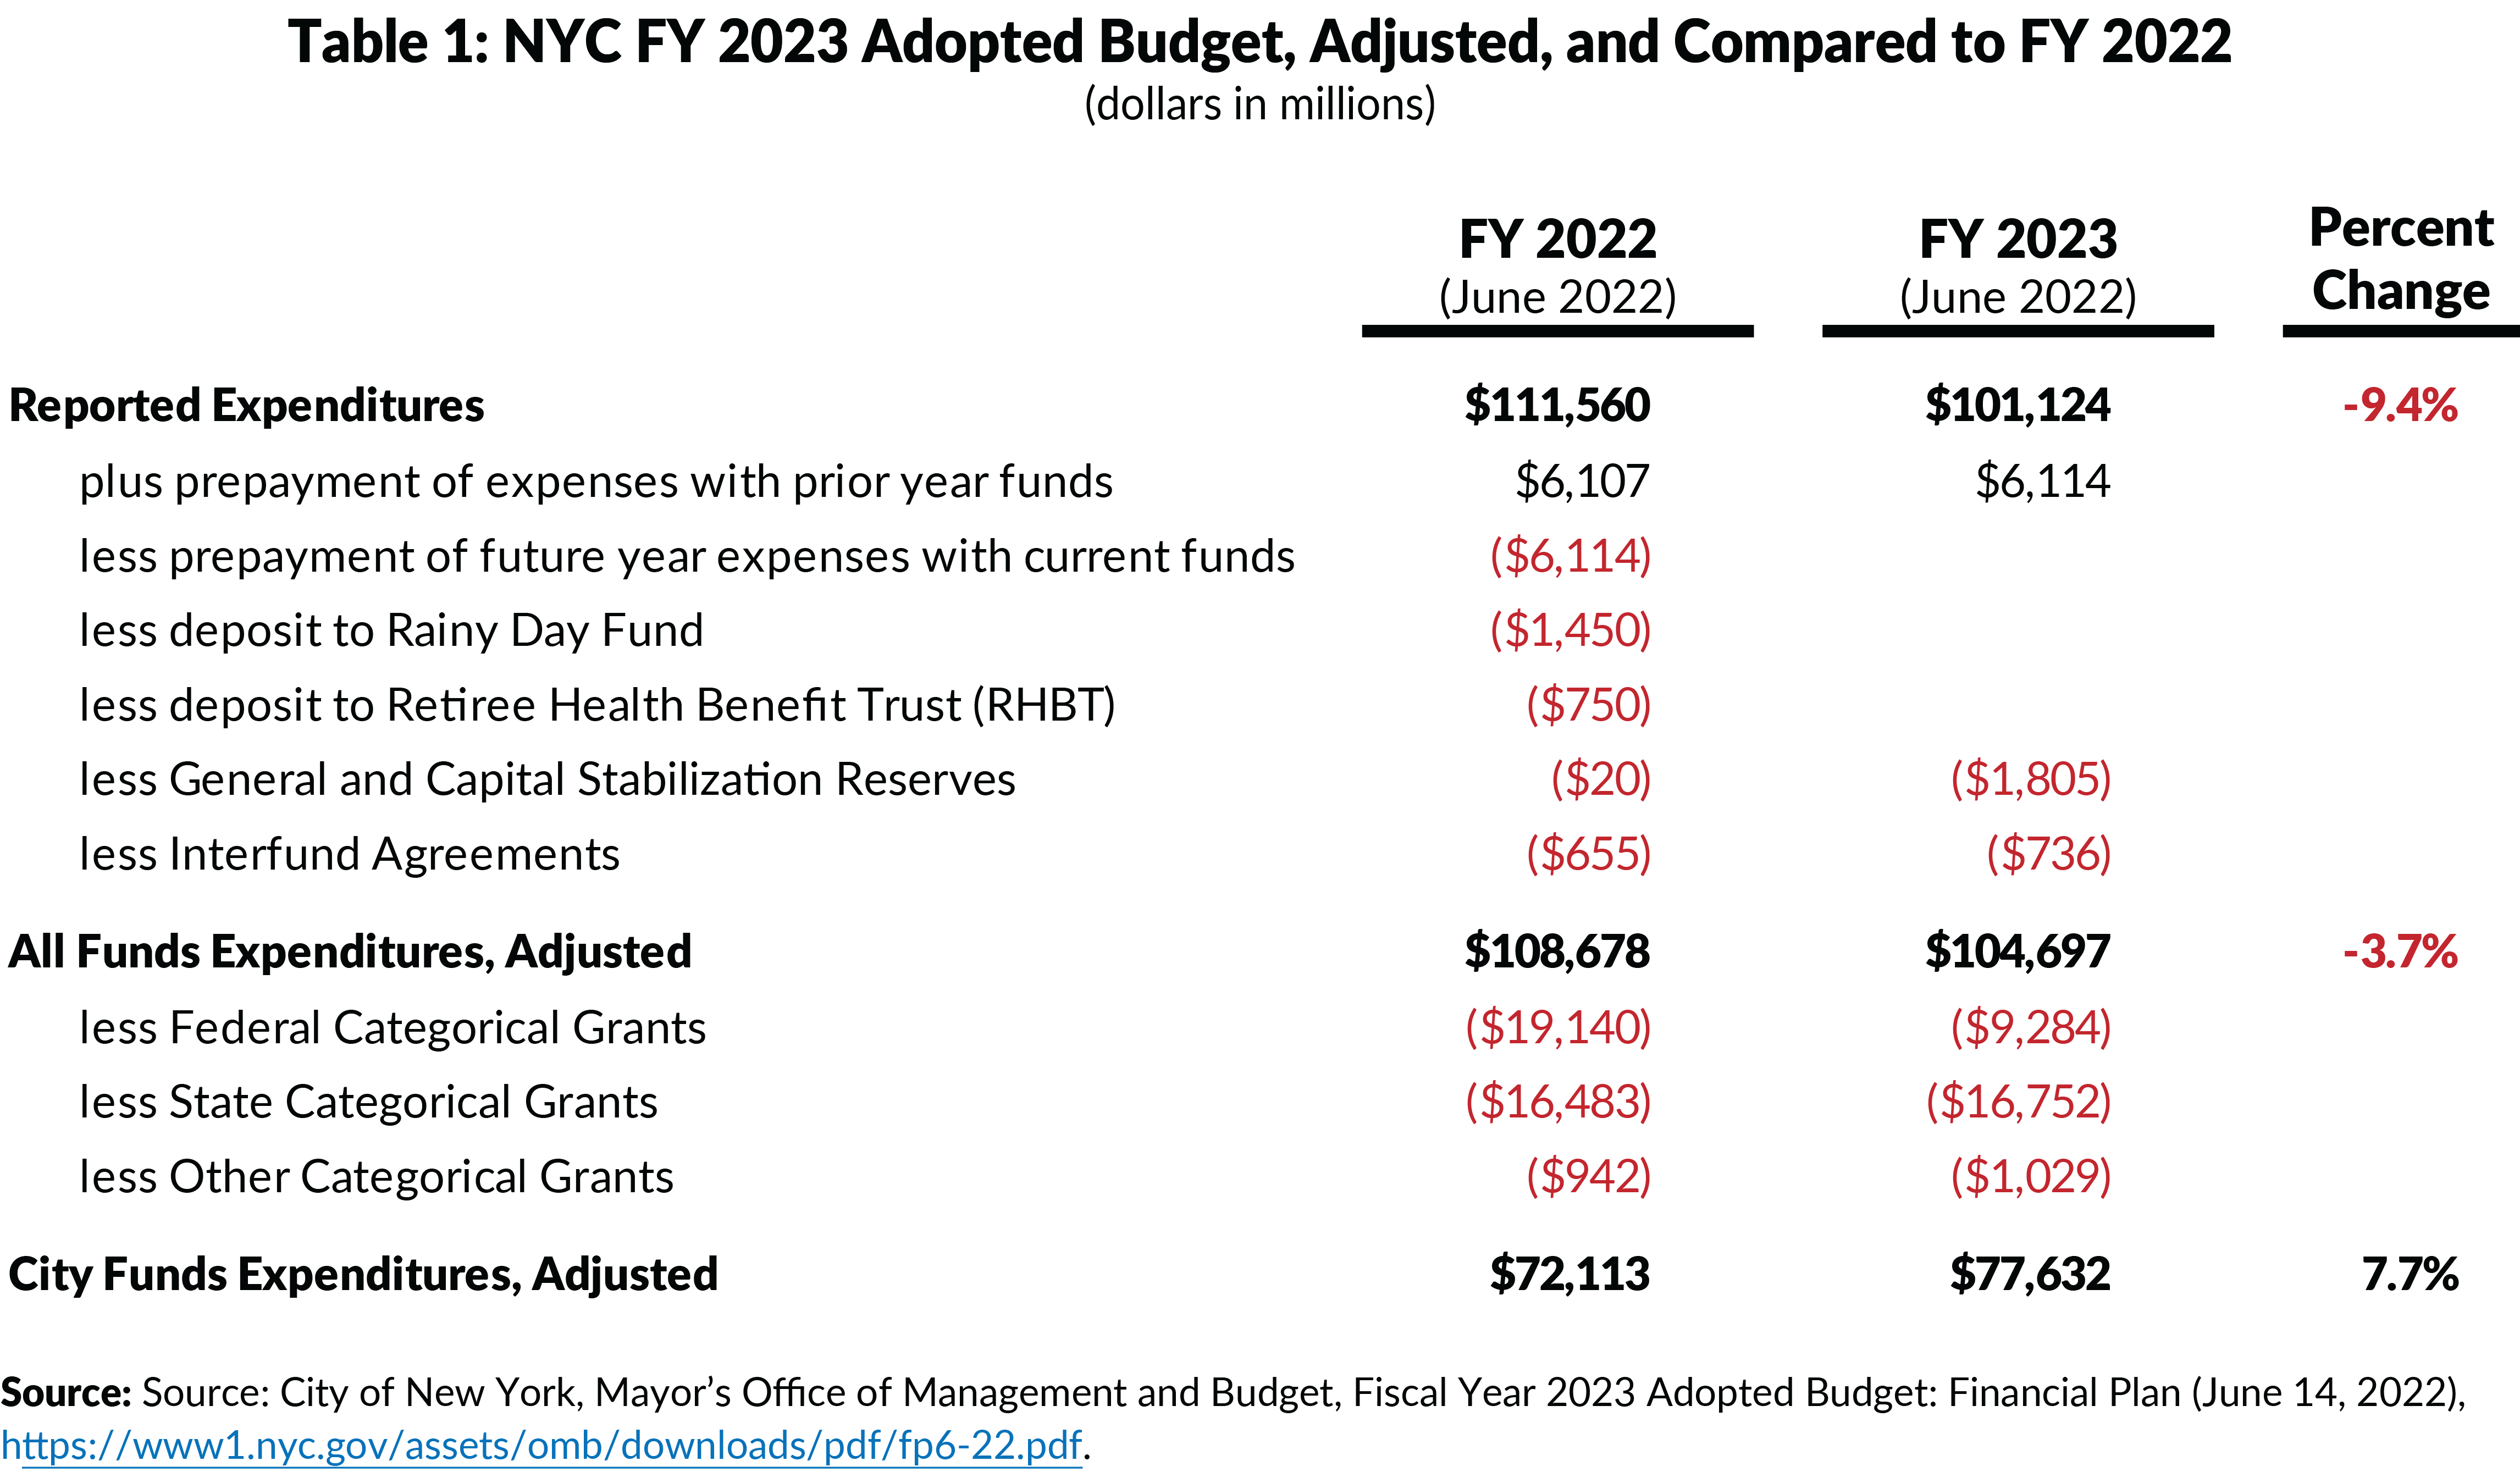 Table 1: NYC Fiscal Year 2023 Adopted Budget, Adjusted, and Comparison to FY 2022